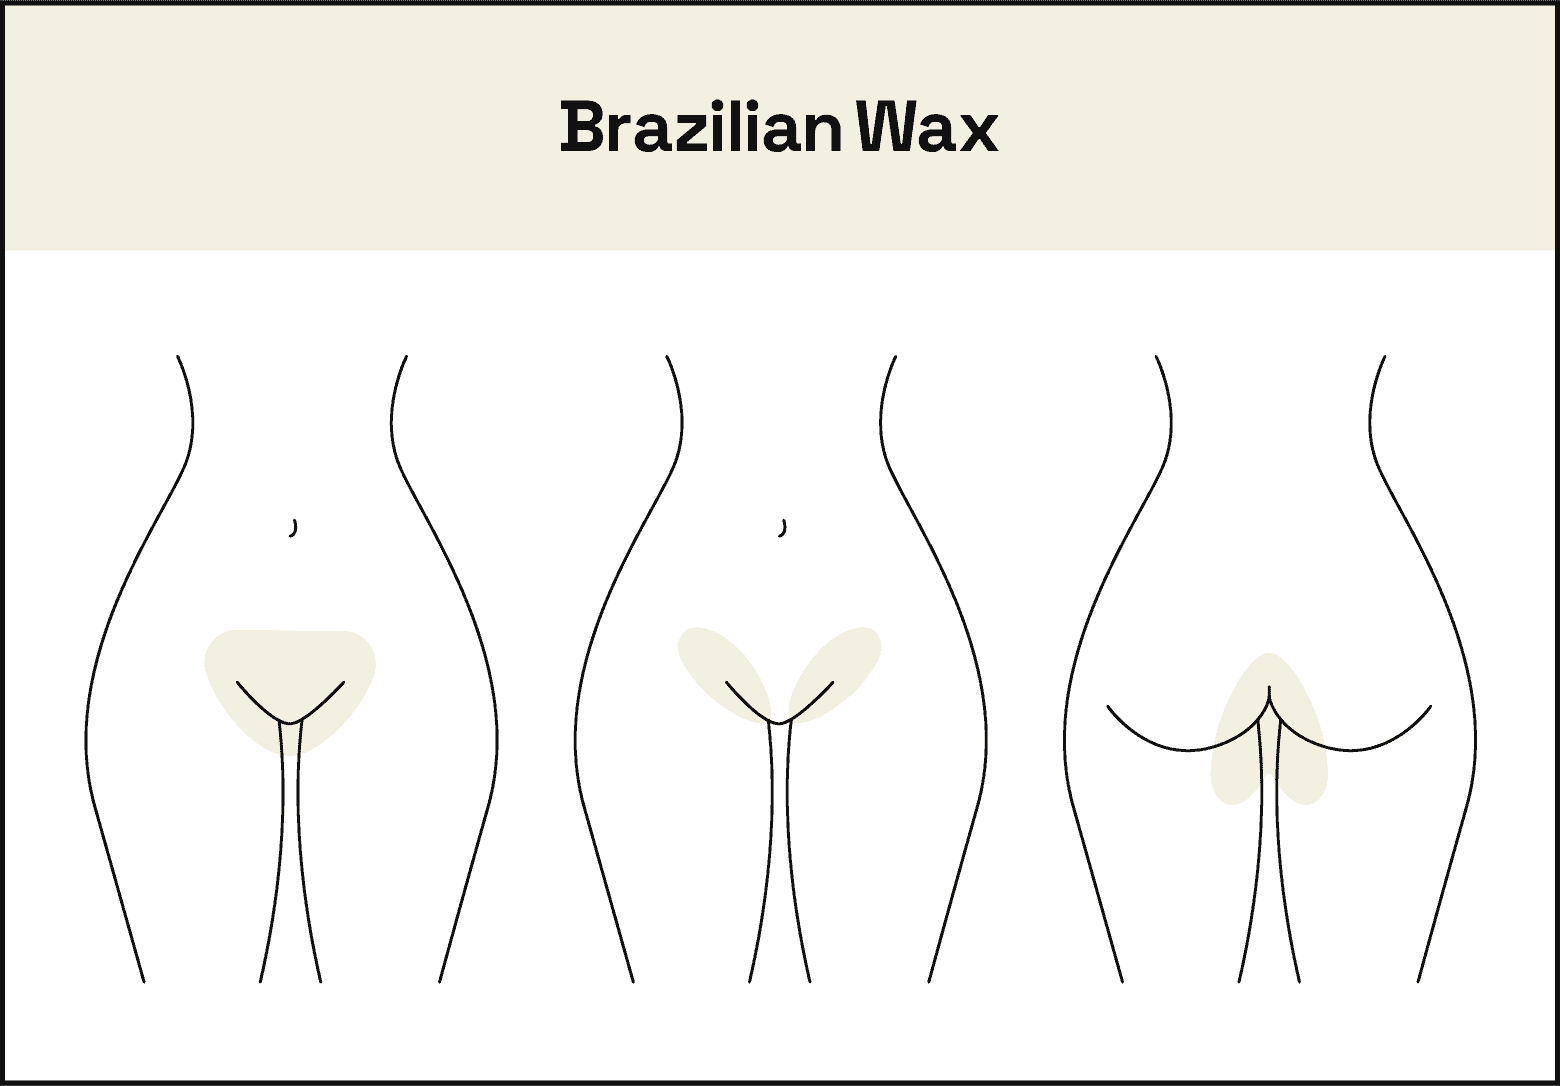 illustration of the bikini, pubic, and butt areas that a Brazilian wax covers